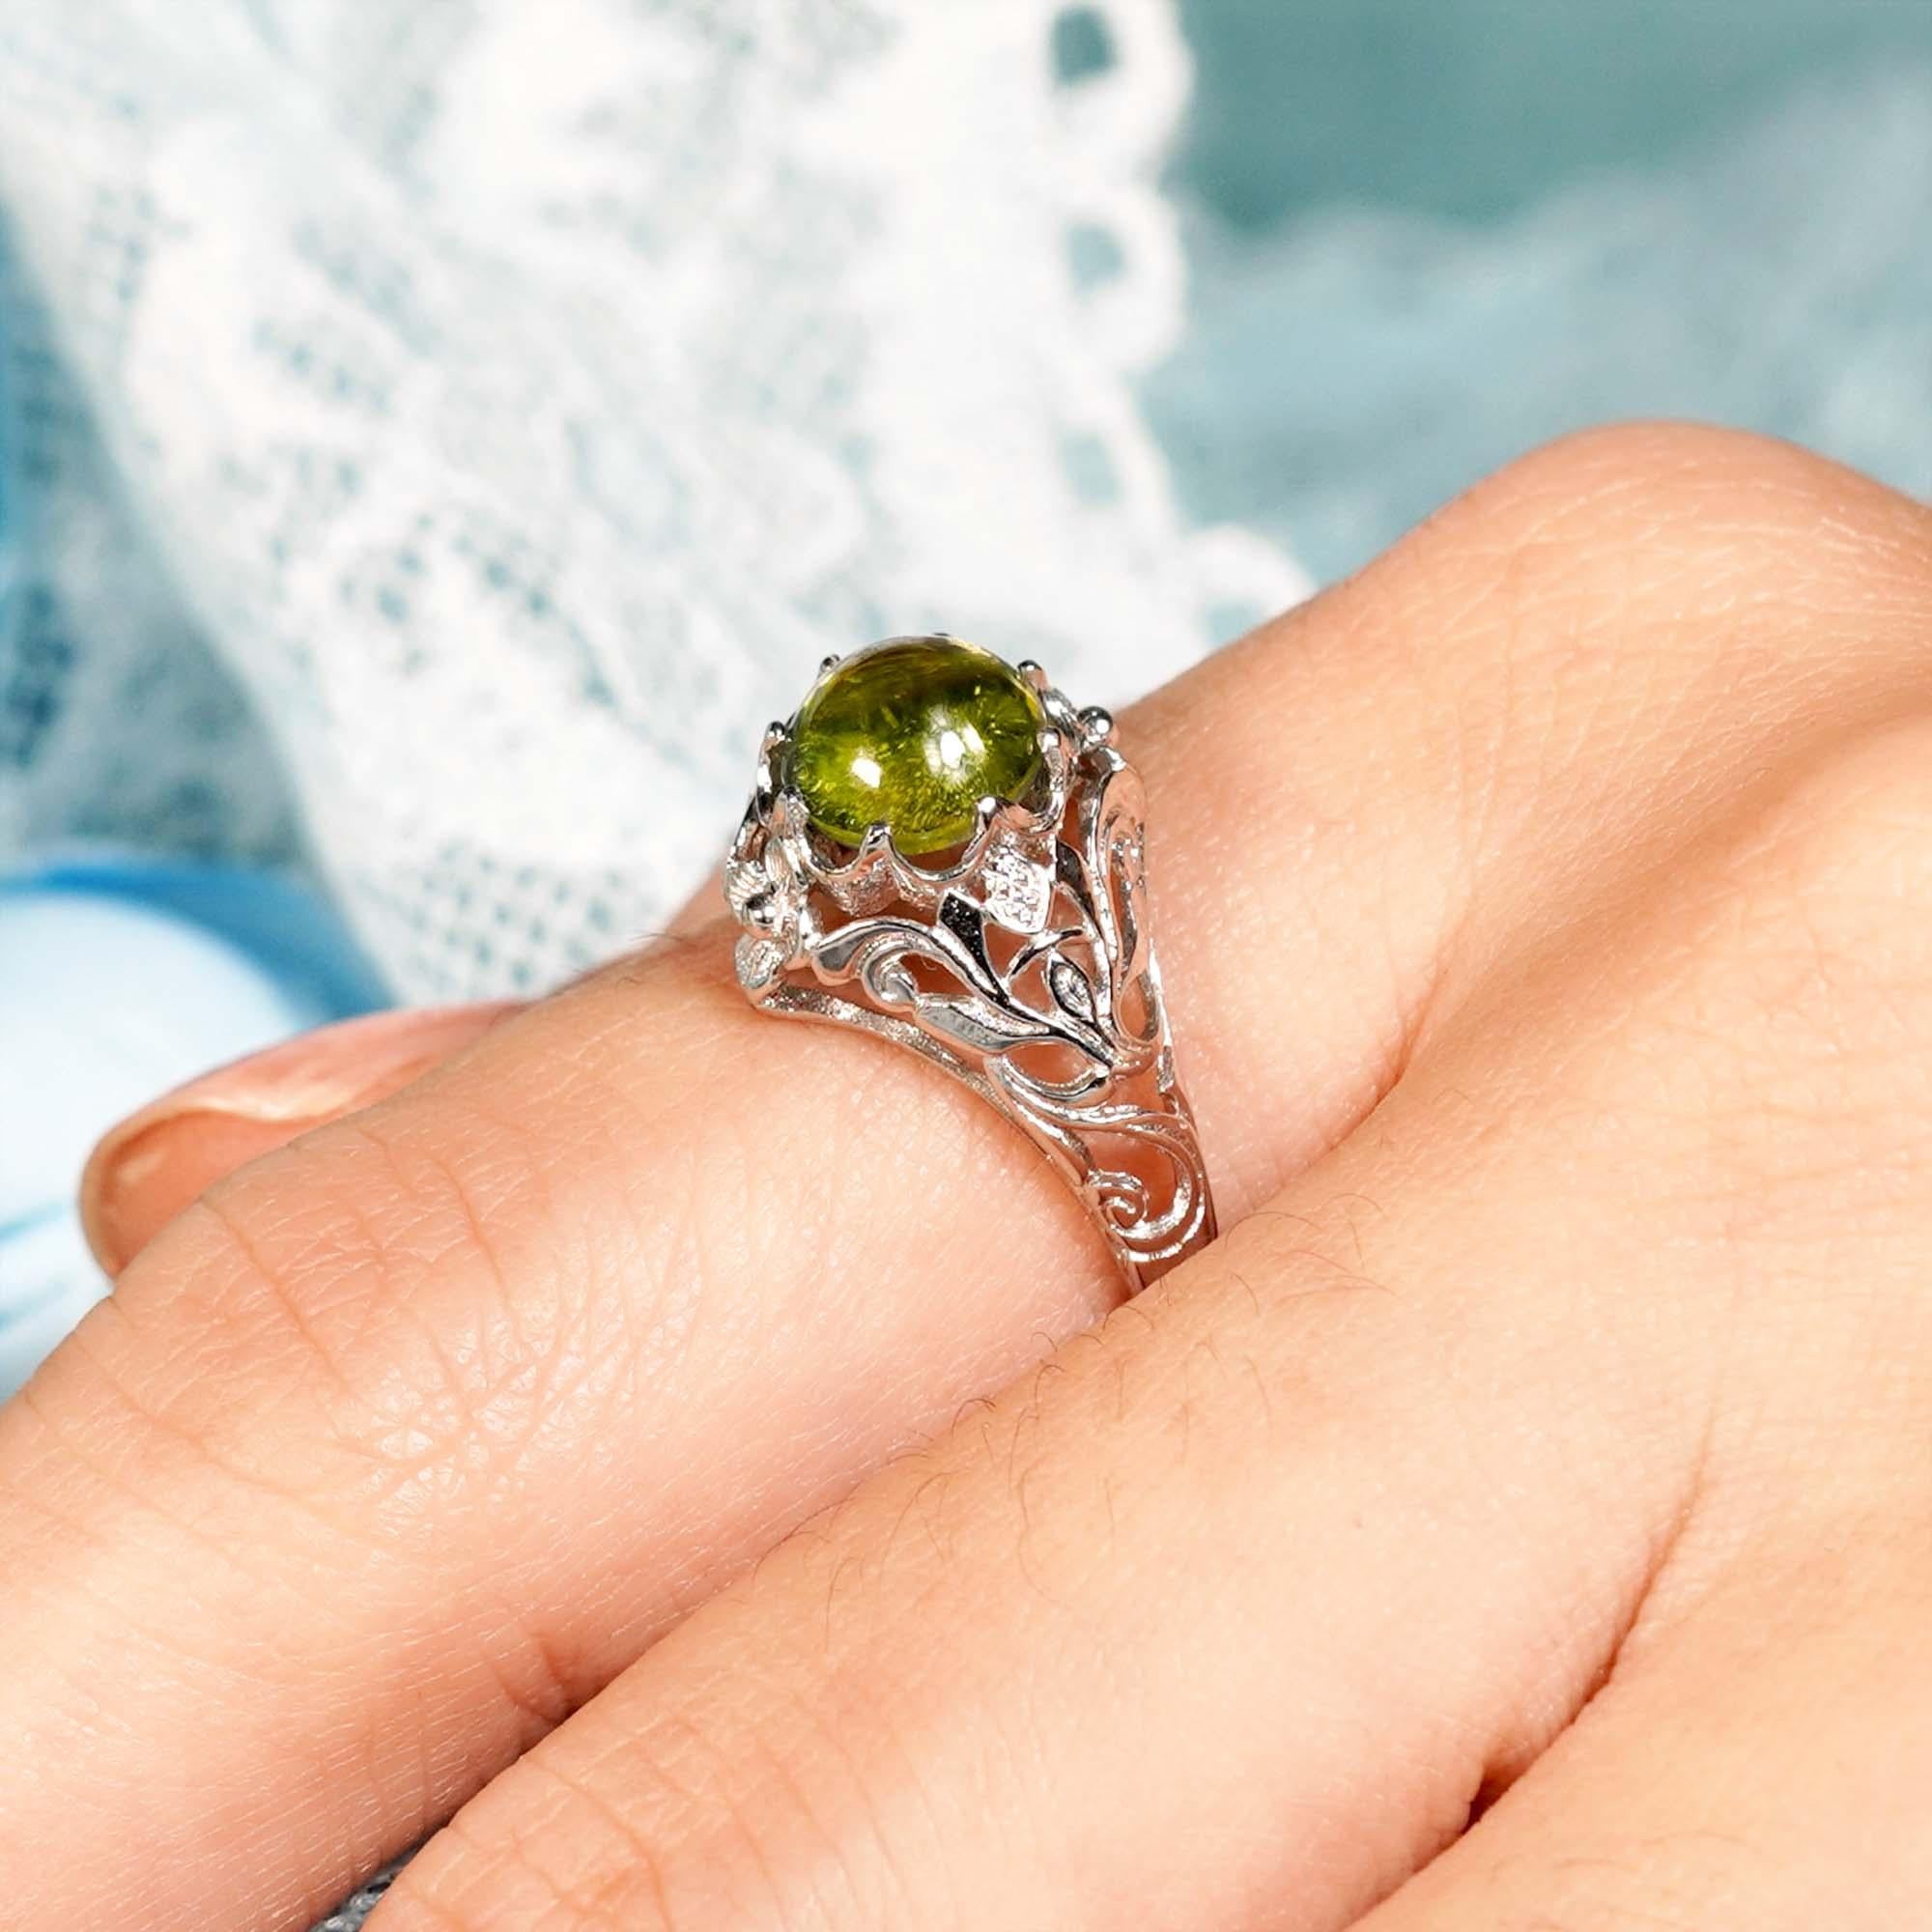 For Sale:  Natural Cabochon Peridot Vintage Style Filigree Ring in Solid 9K White Gold 10